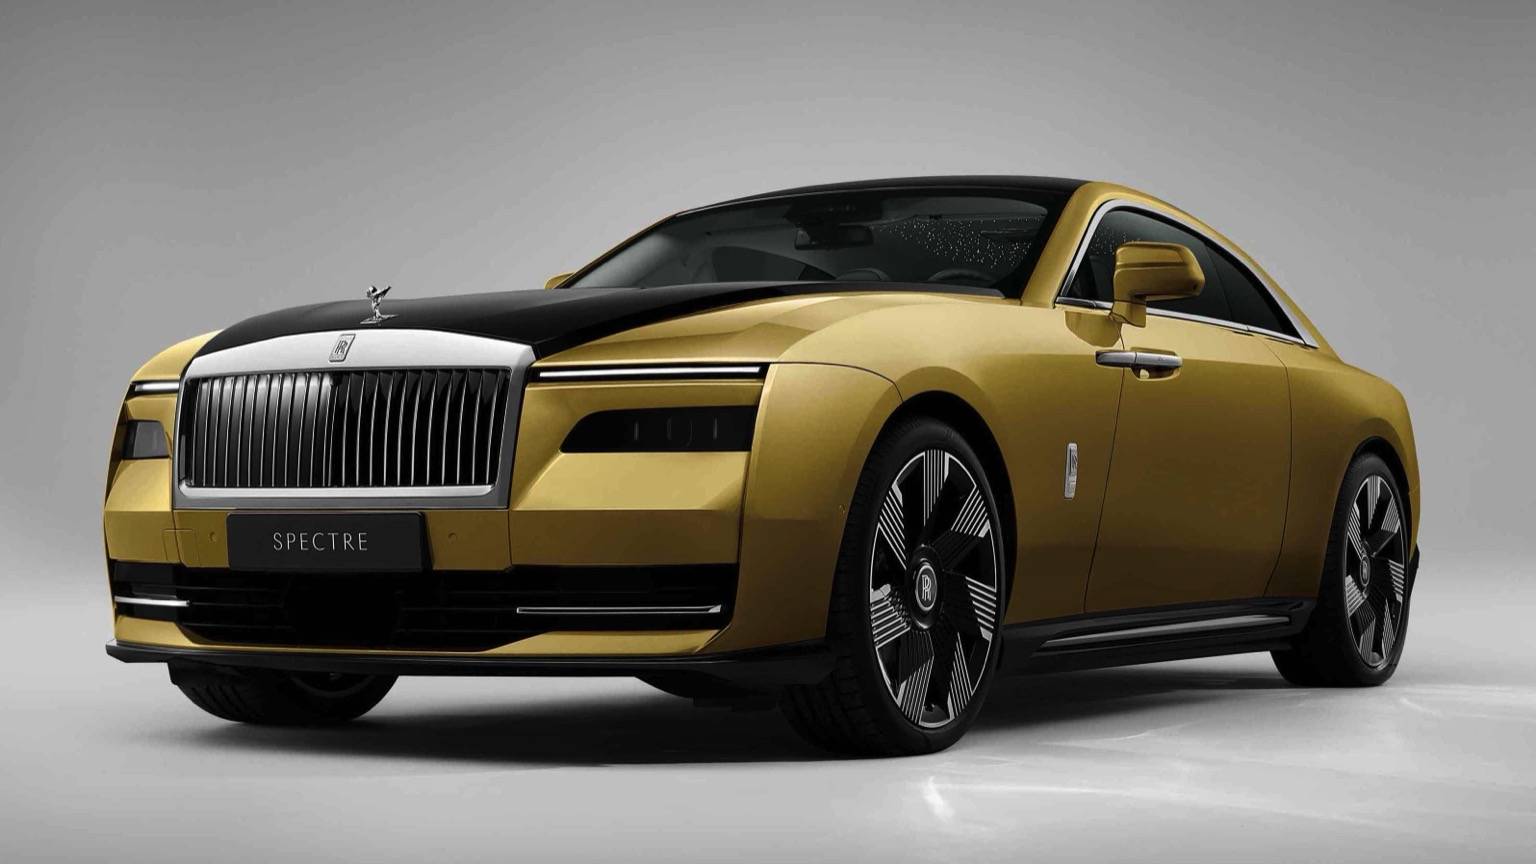 A yellow Rolls Royce Spectre 2023 in yellow with black trims and wheels